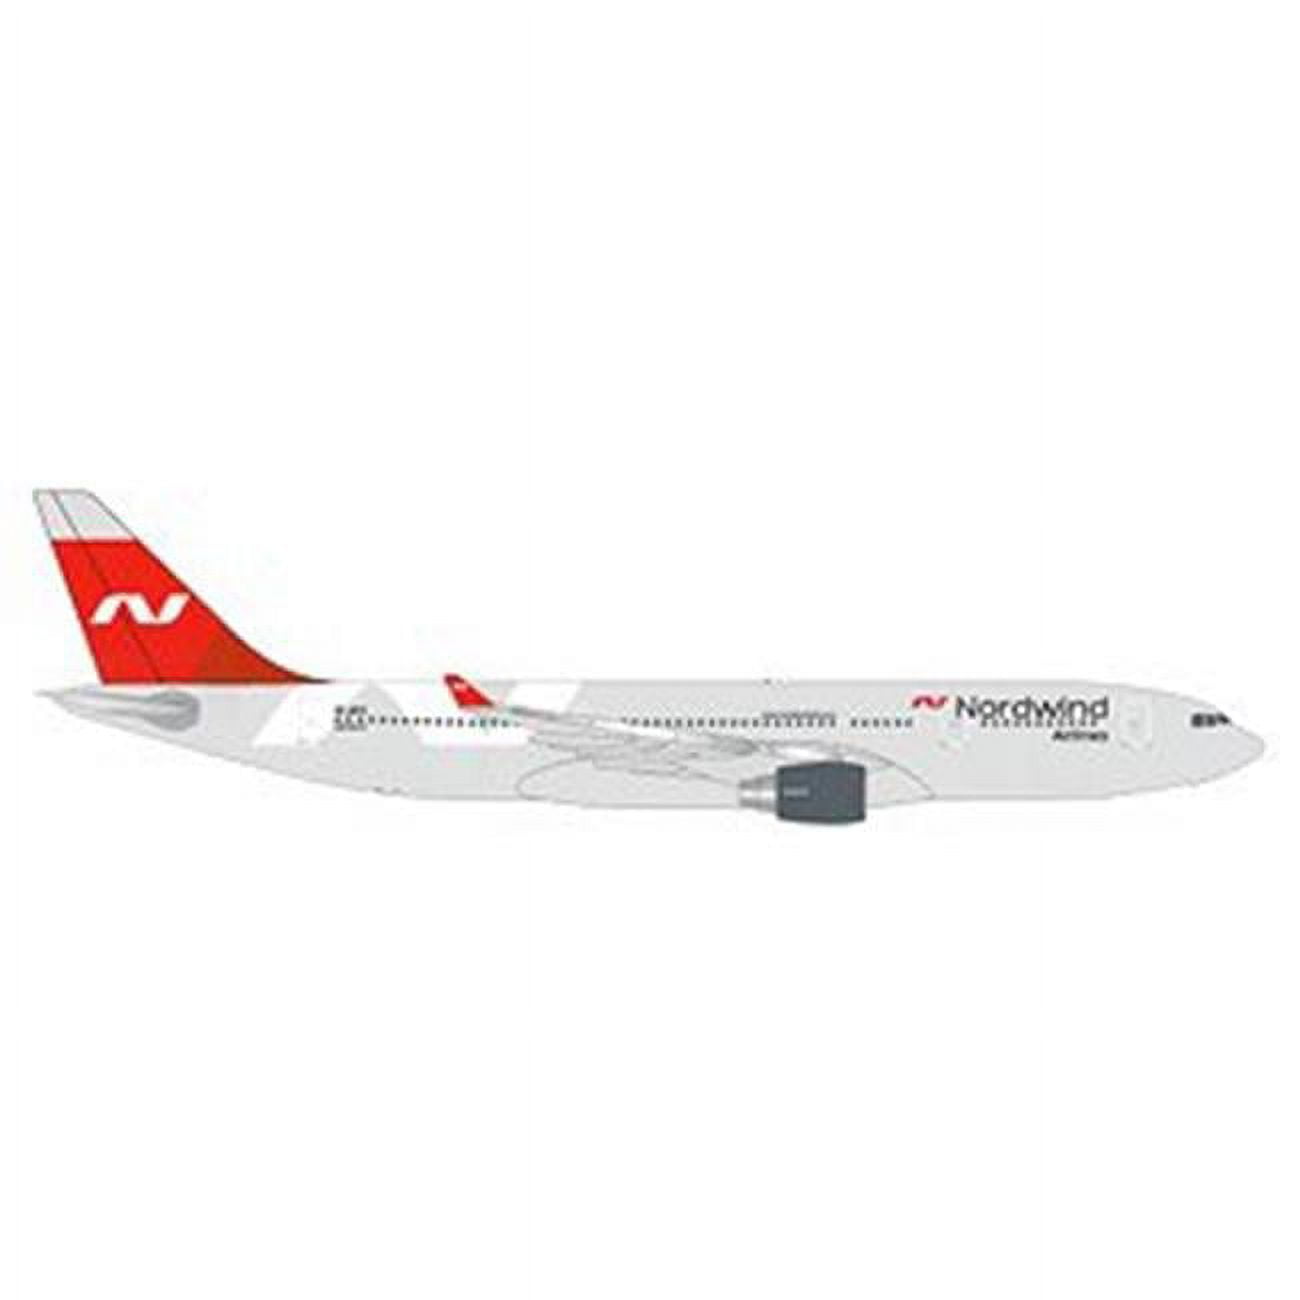 Herpa Wings HE531771 1-500 Nordwind Airlines Airbus A330-200 Pre-built Aircraft -  IGZU